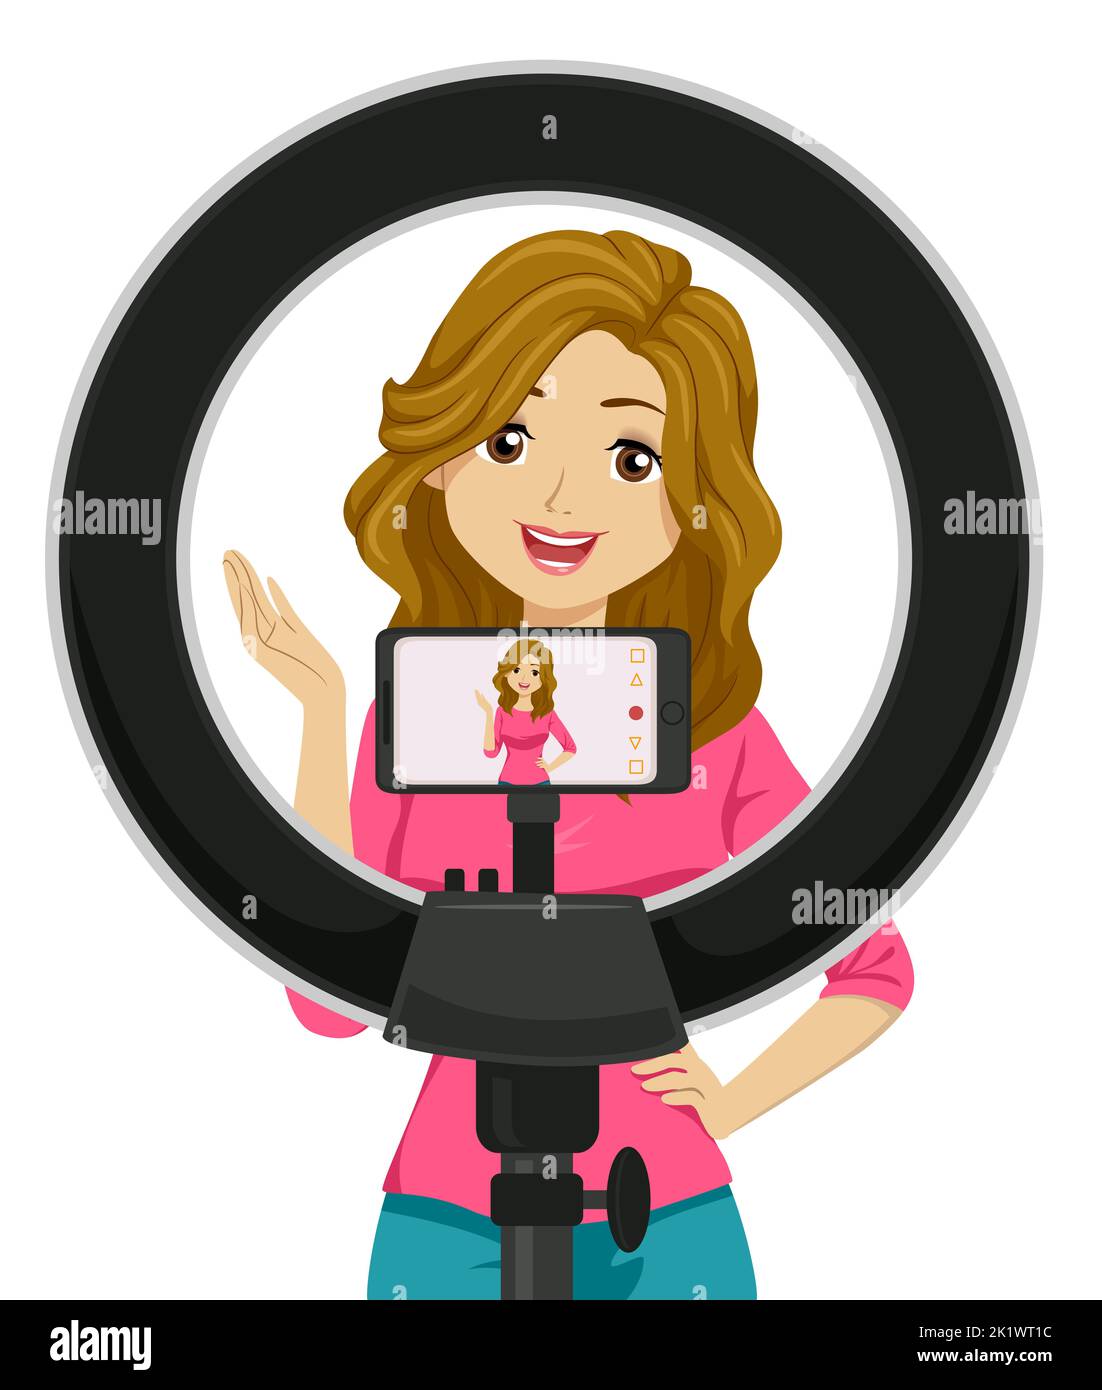 Illustration of Teen Girl Filming a Vlog Using Mobile Phone with LED Ring Light Stock Photo